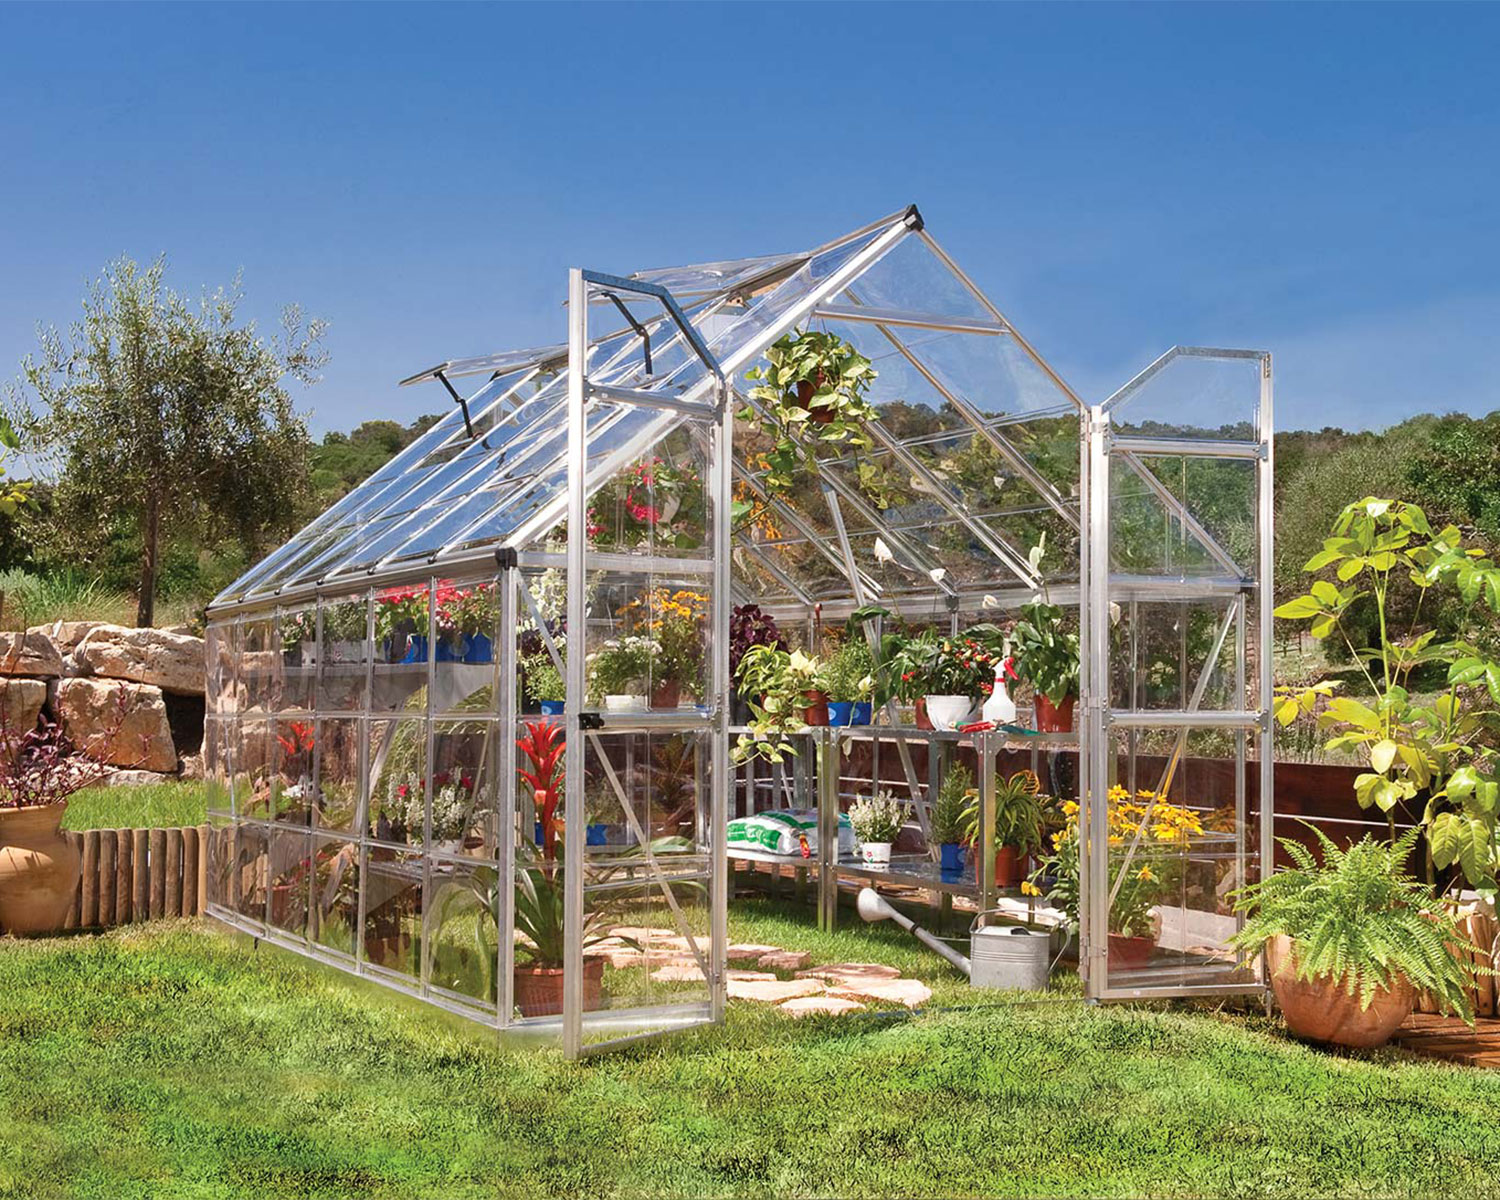 Greenhouse Octave 8' x 12' Kit - Silver Structure & Clear Glazing